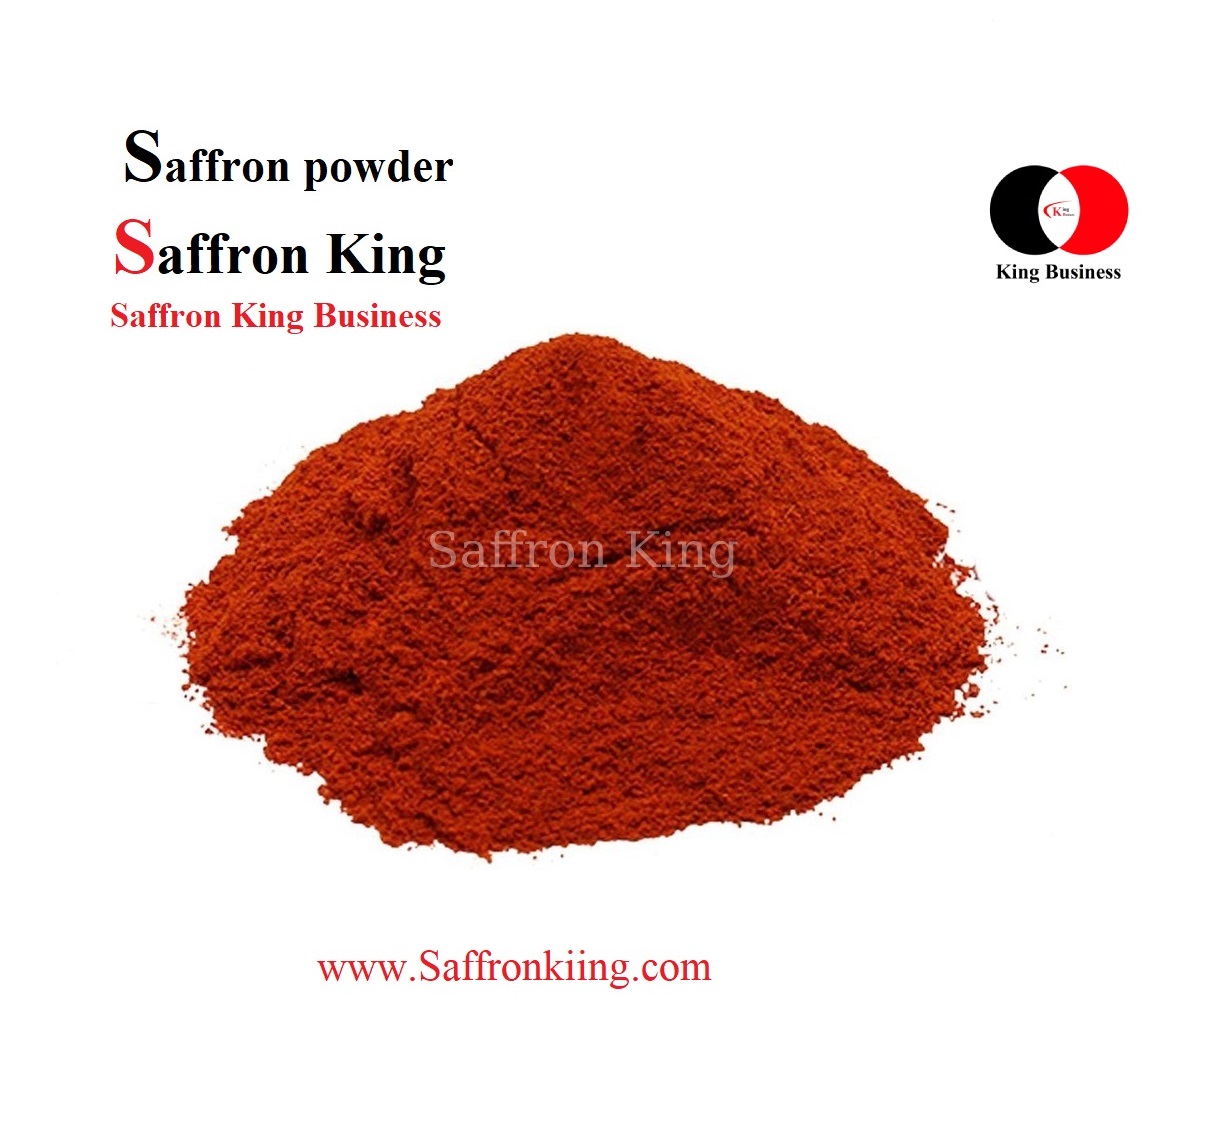 What is the price of buying saffron powder?